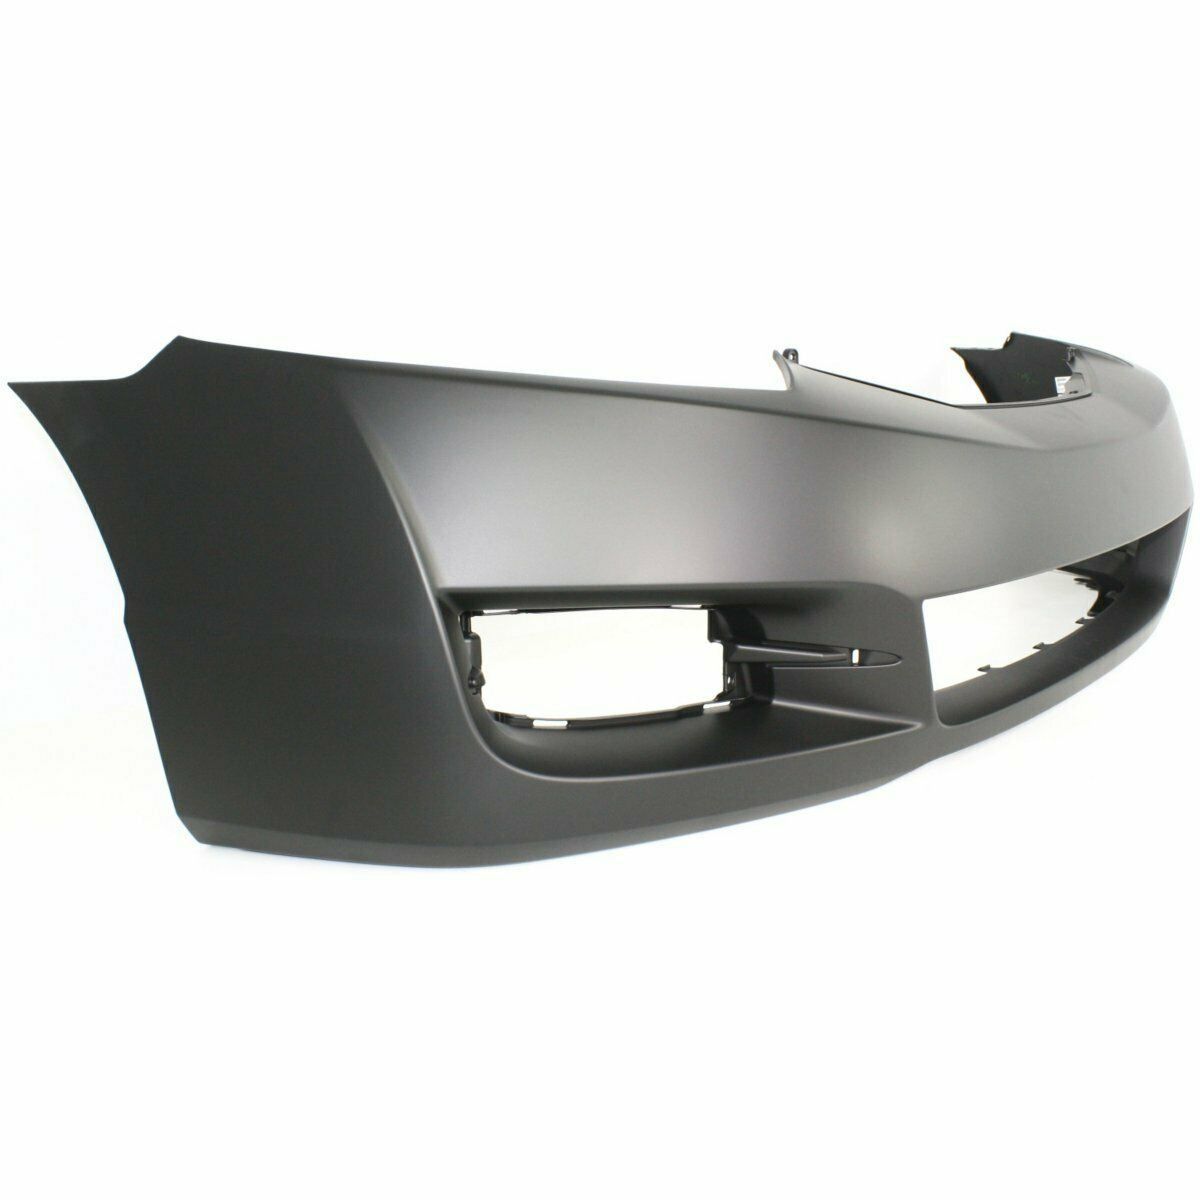 2009-2011 Honda Civic Coupe Front Bumper Painted to Match